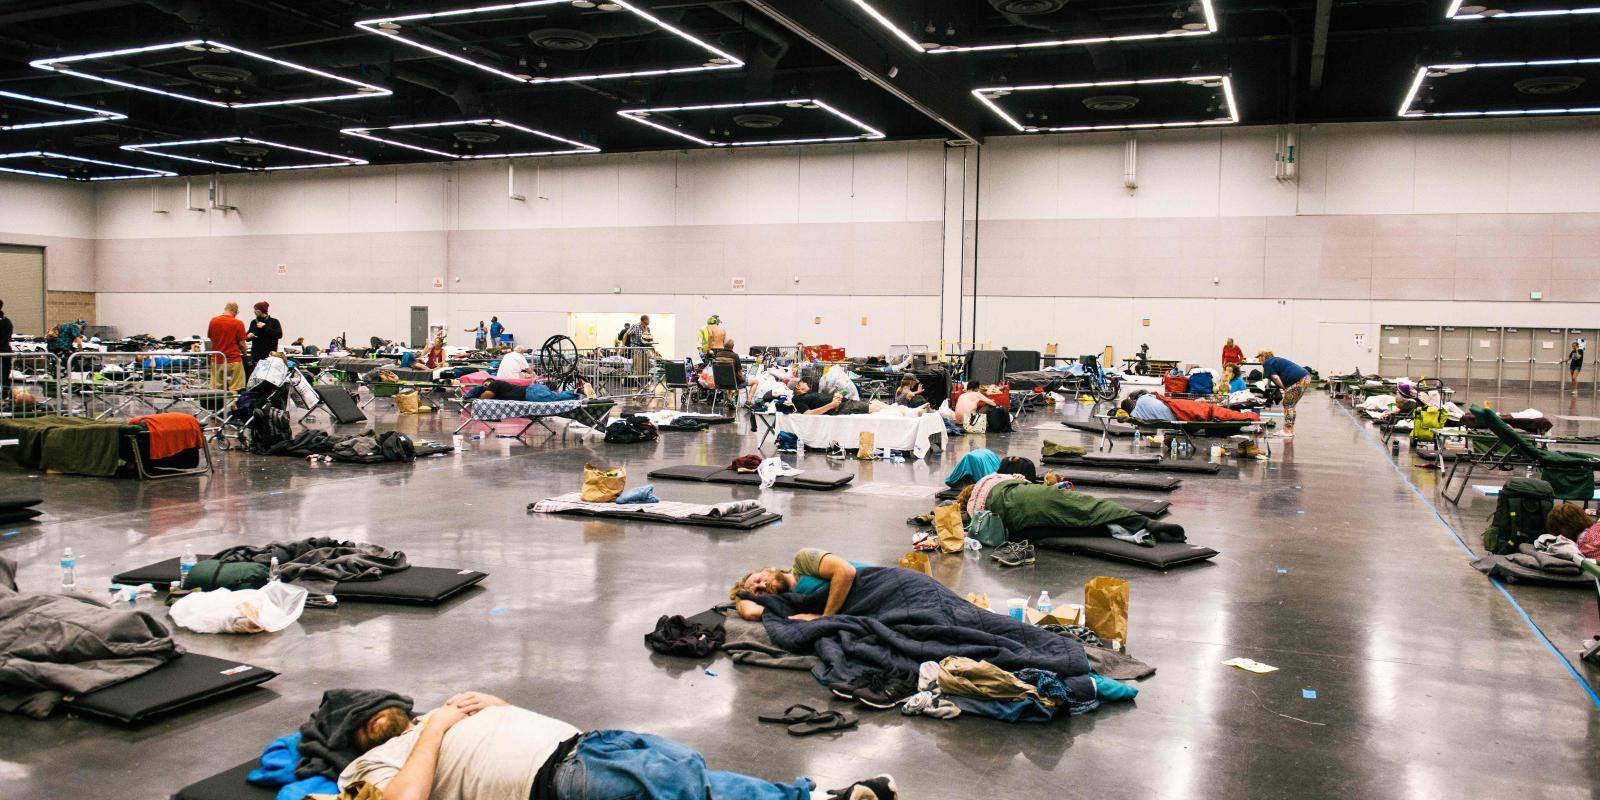 Photo shows people lying down at a cooling station during a heatwave in Portland, Oregon, in June 2021